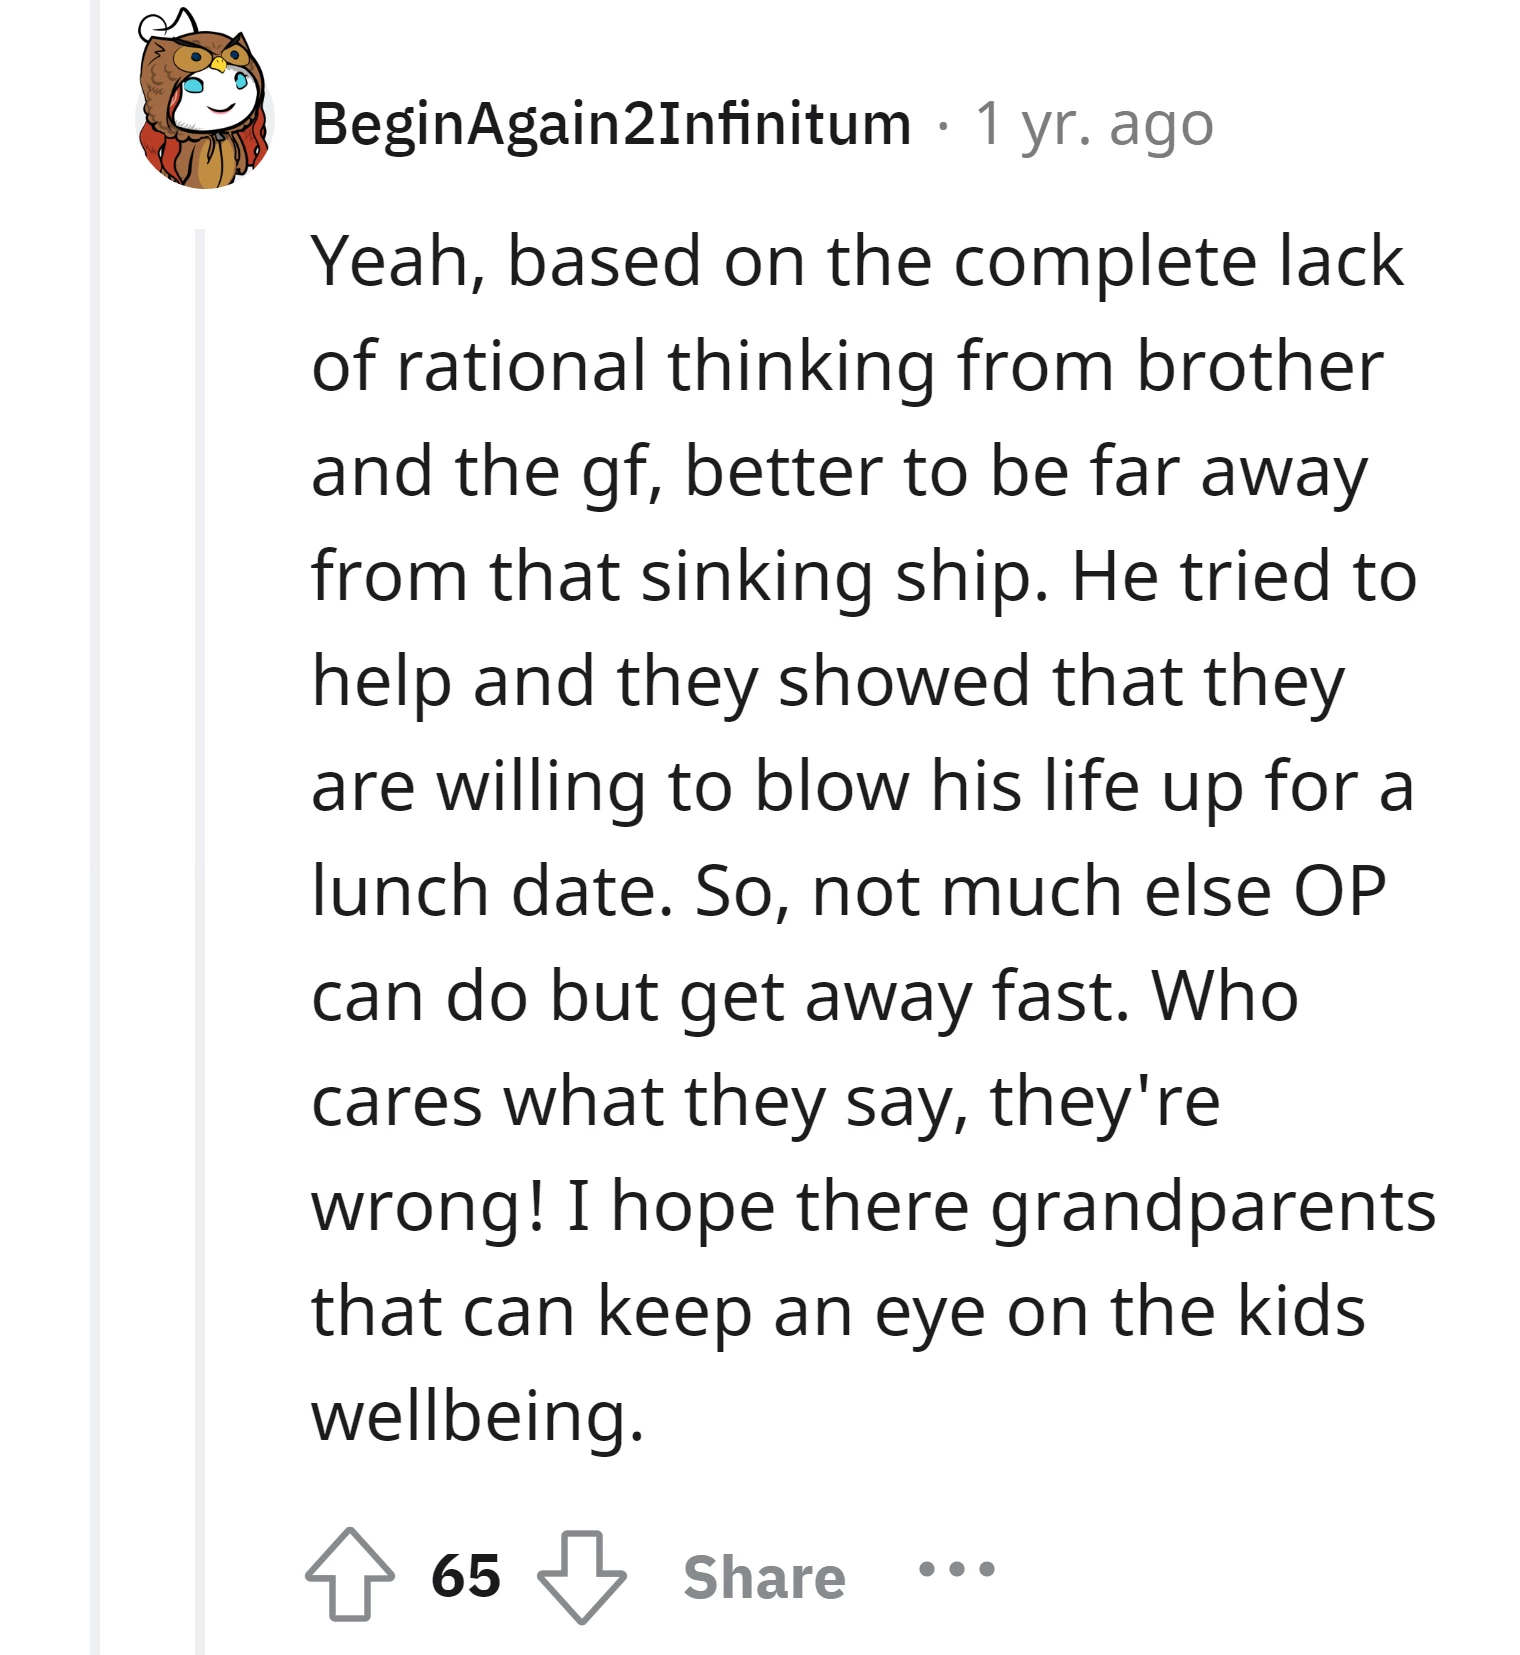 Commenter advises the OP to distance themselves from the brother and his girlfriend